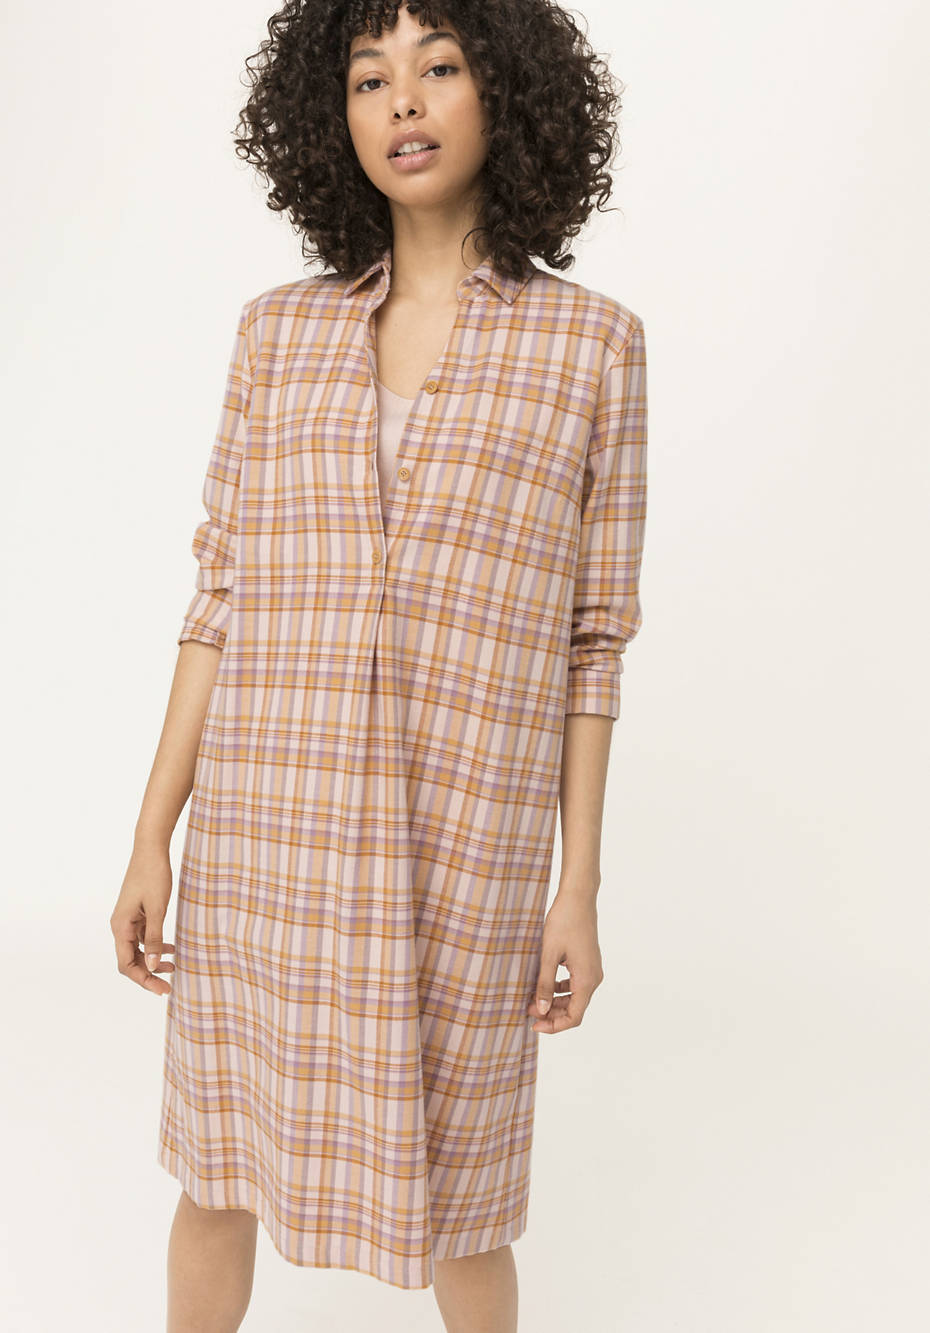 Flannel nightgown made from pure organic cotton